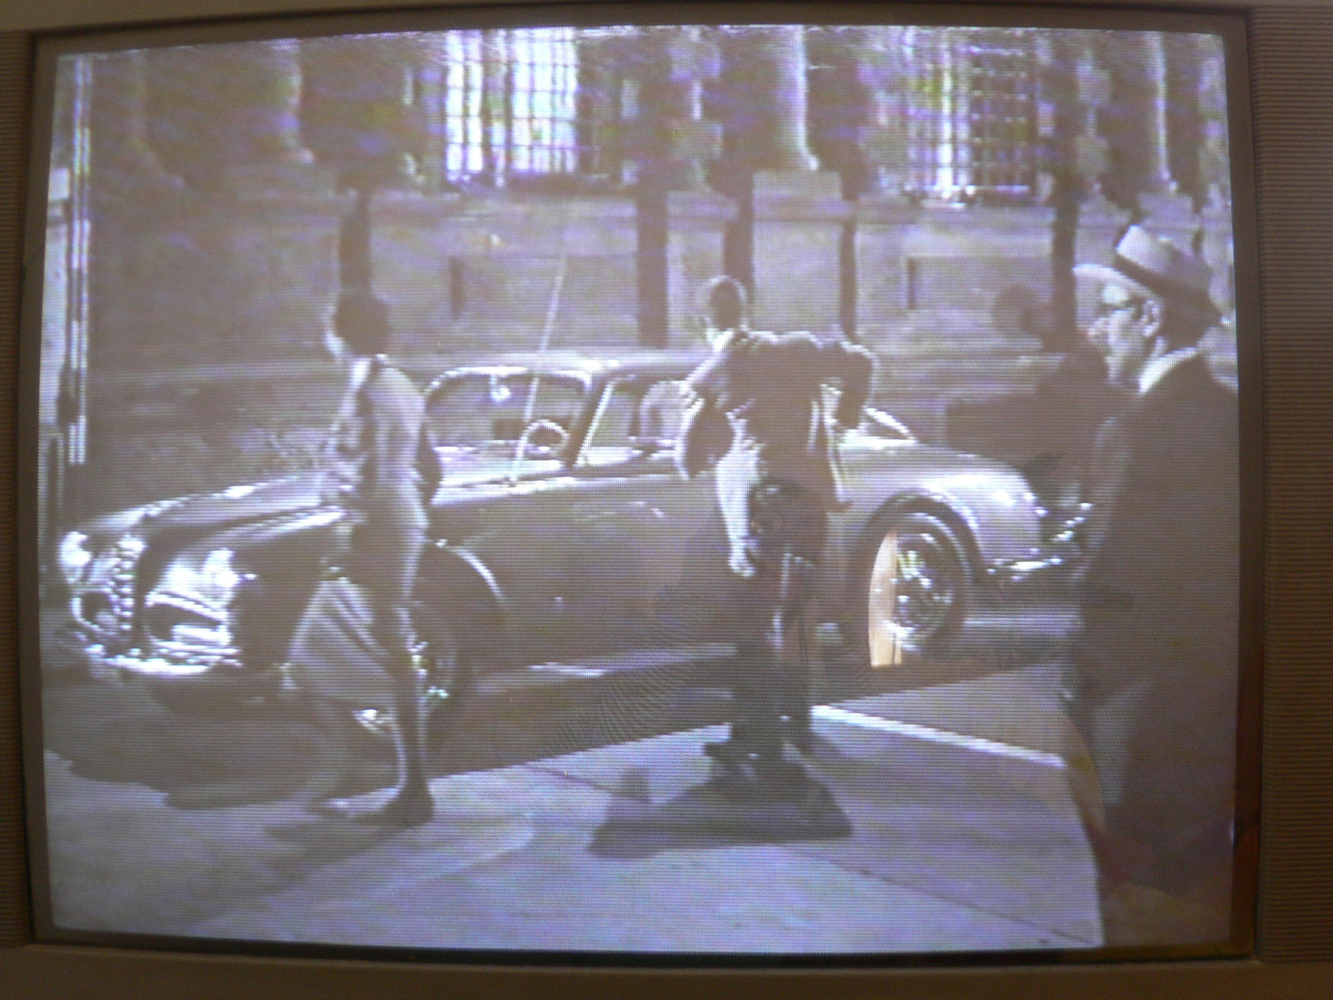 Frame from Alberto Lattuada’s film Scuola elementare (Elementary School), with Steinberg, at right, as an extra in the Galleria of Milan.